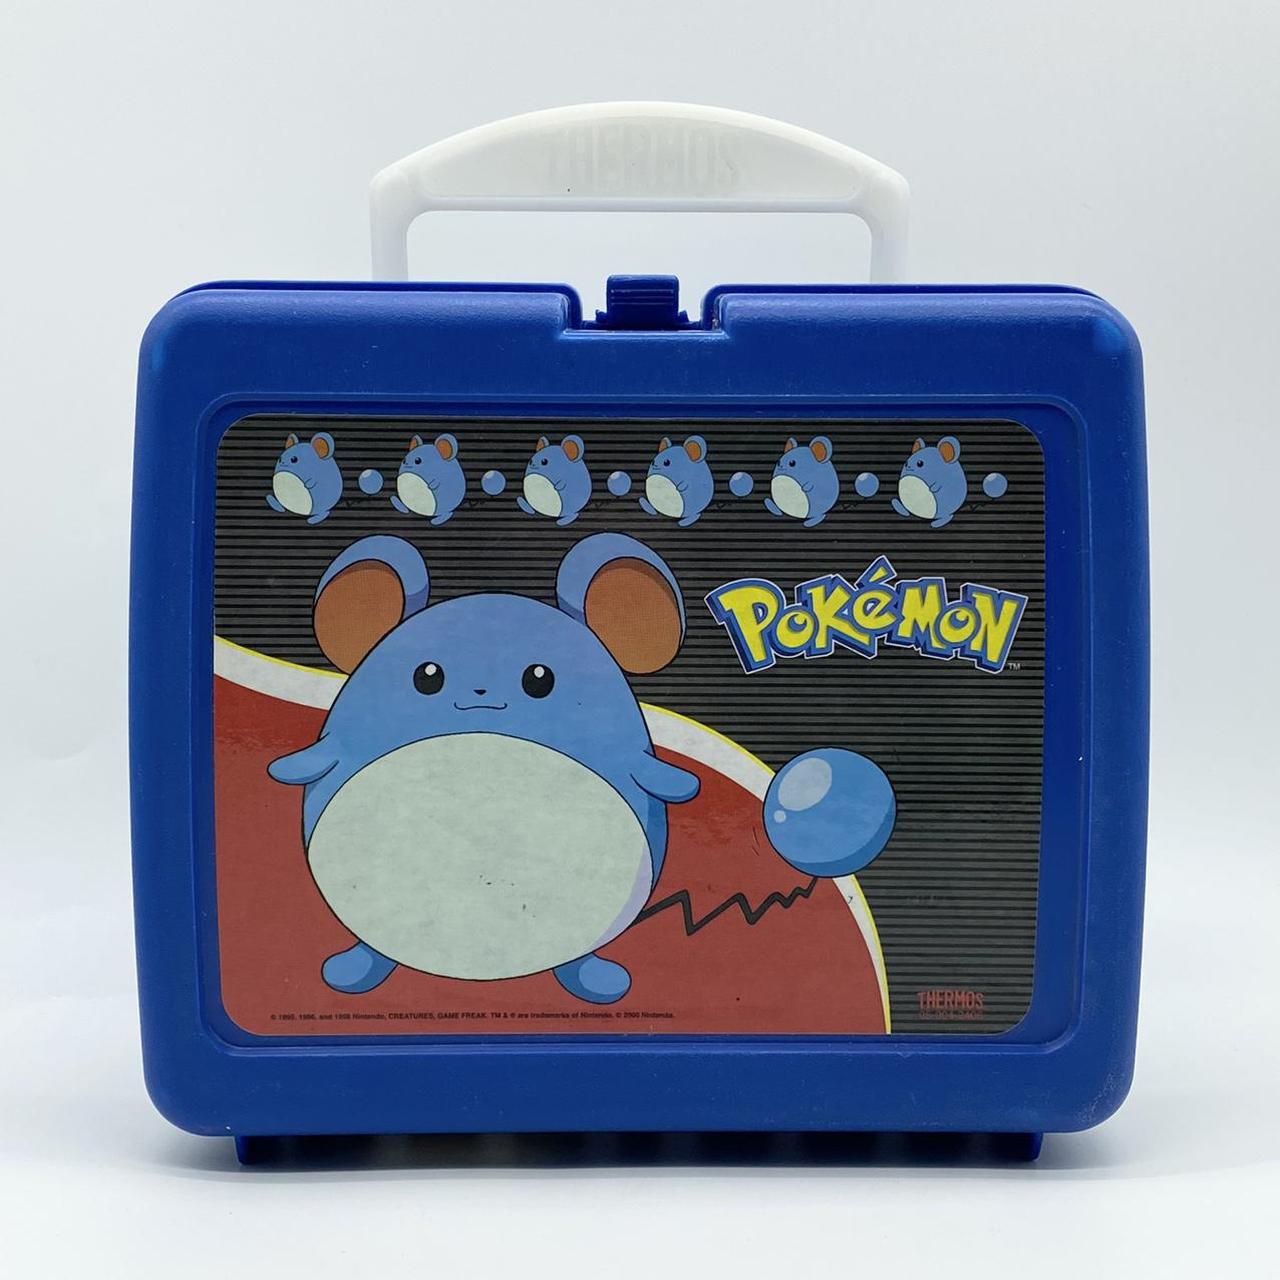 Product Image 1 - For the Pokémon lover! Vintage